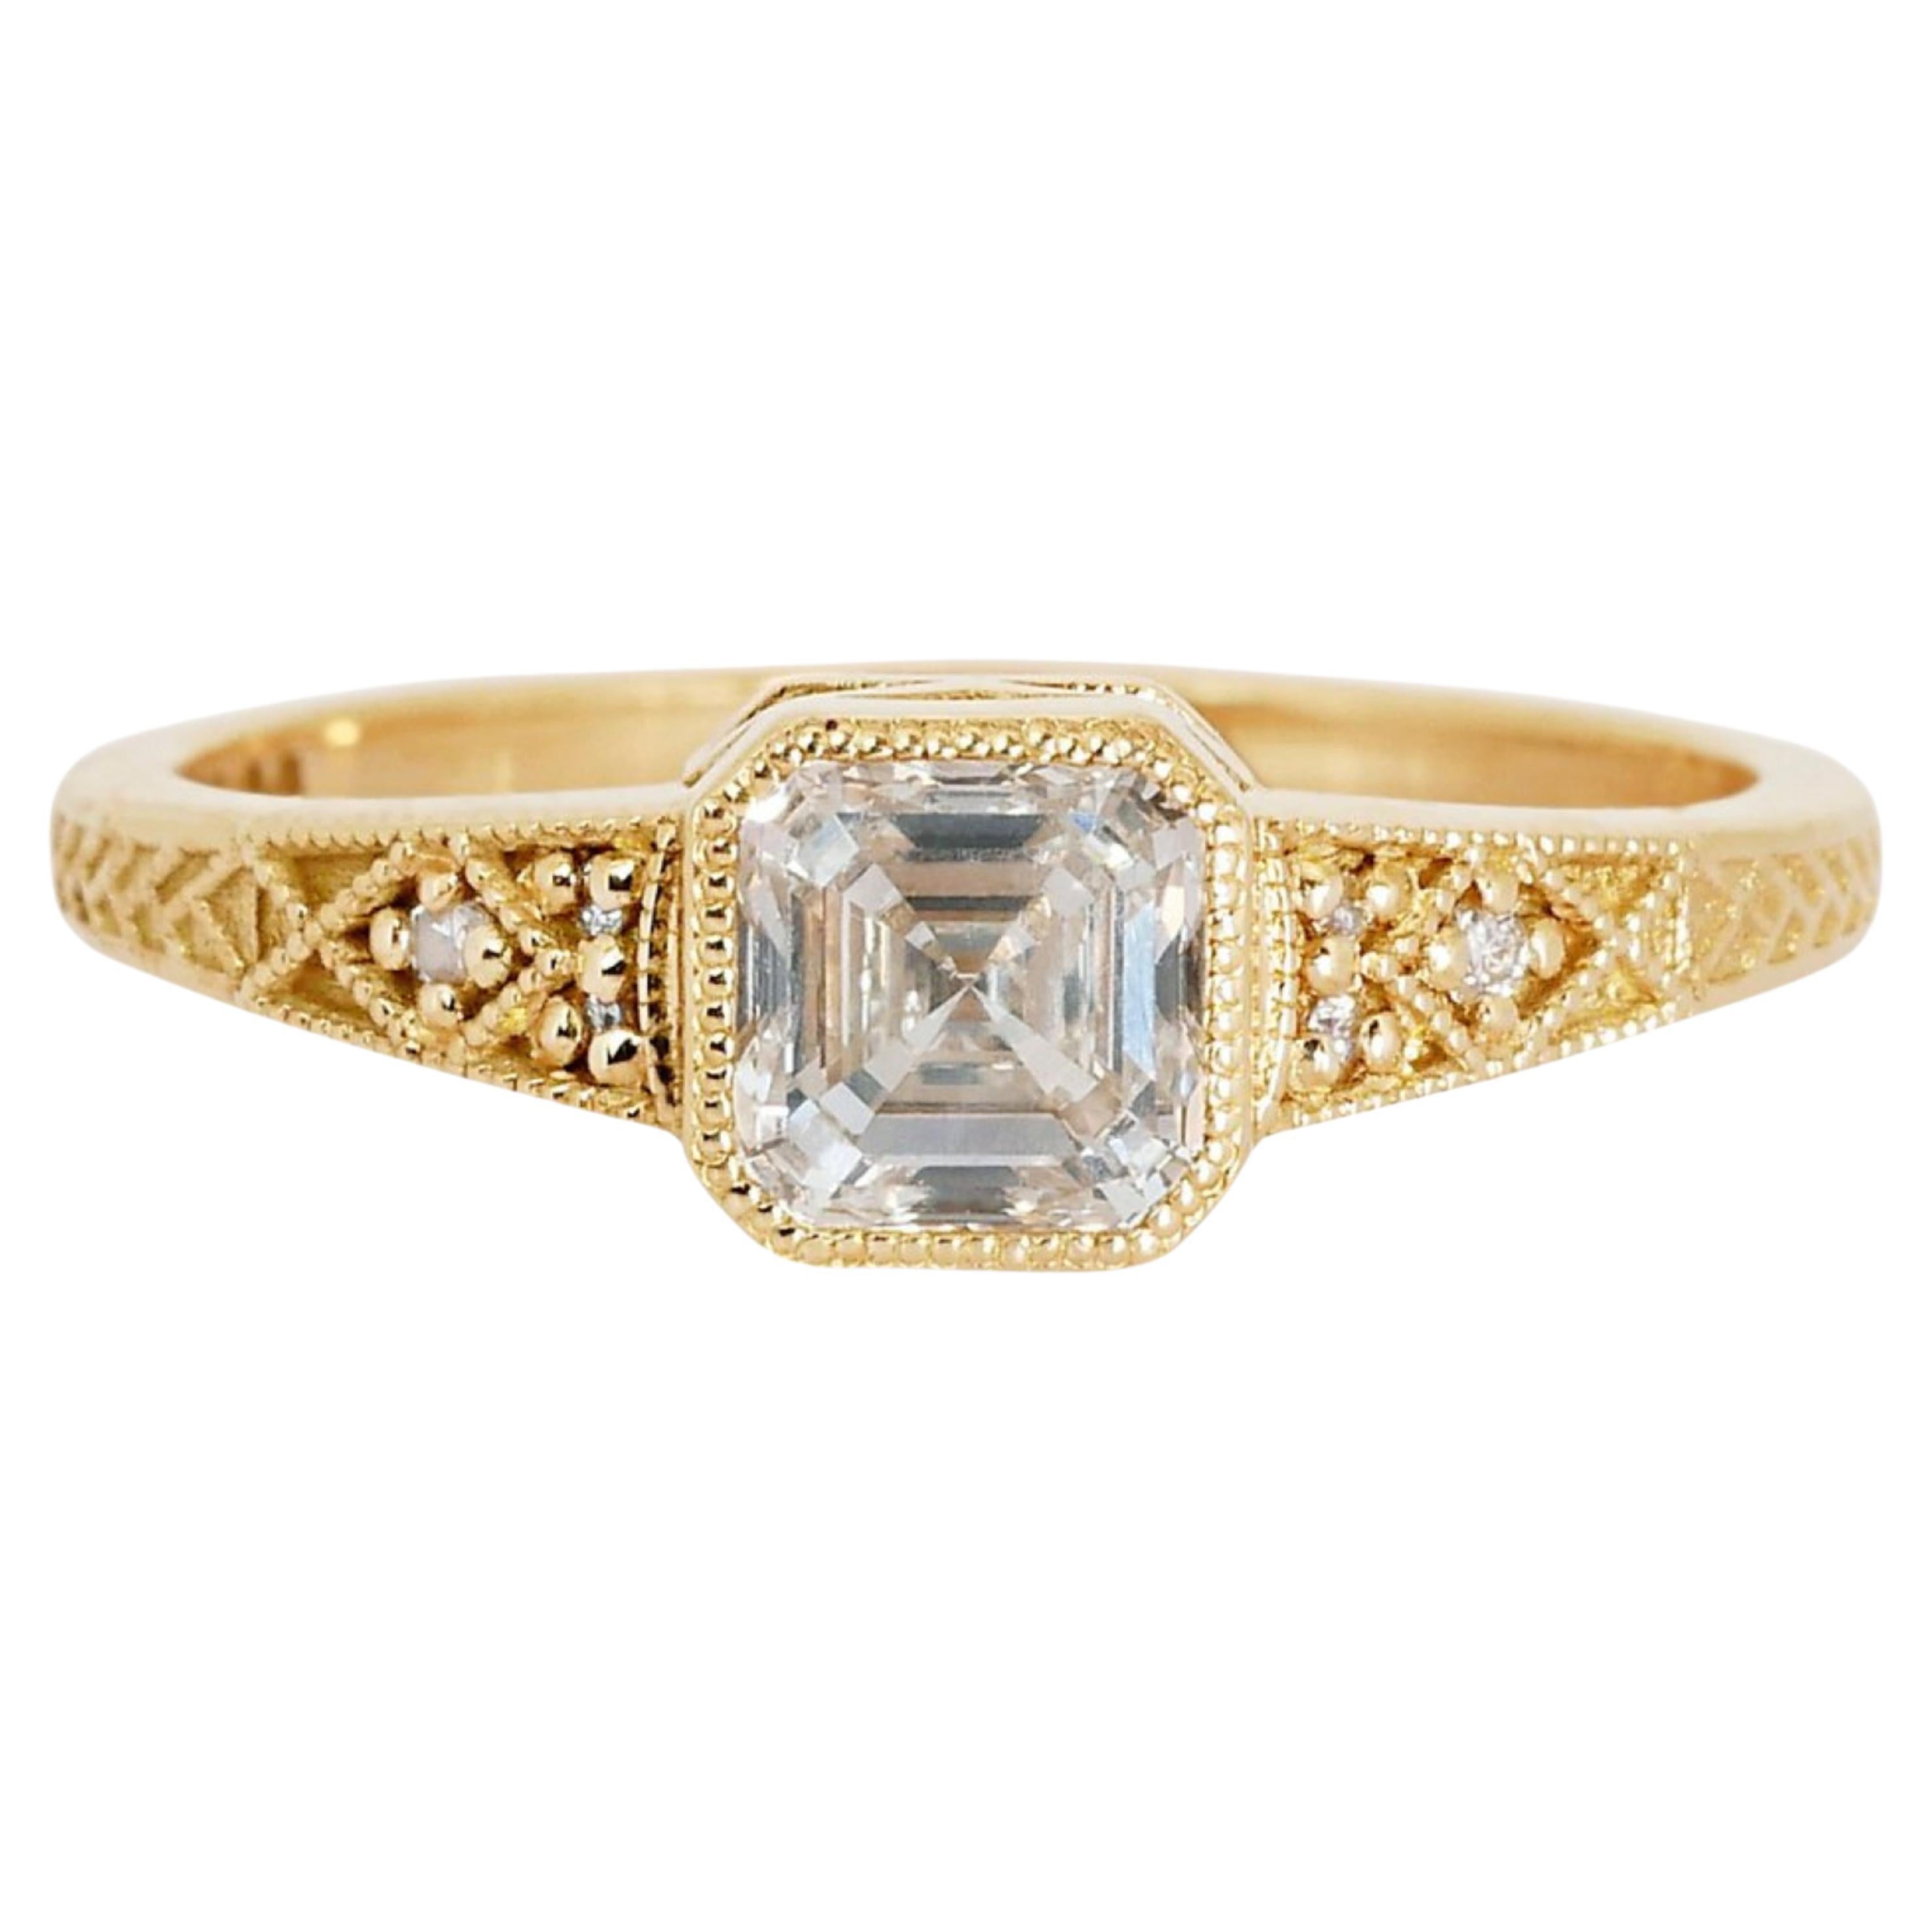 Magnificent 18k Yellow Gold Antique Style Ring w/ 0.83 ct Natural Diamonds IGI C For Sale